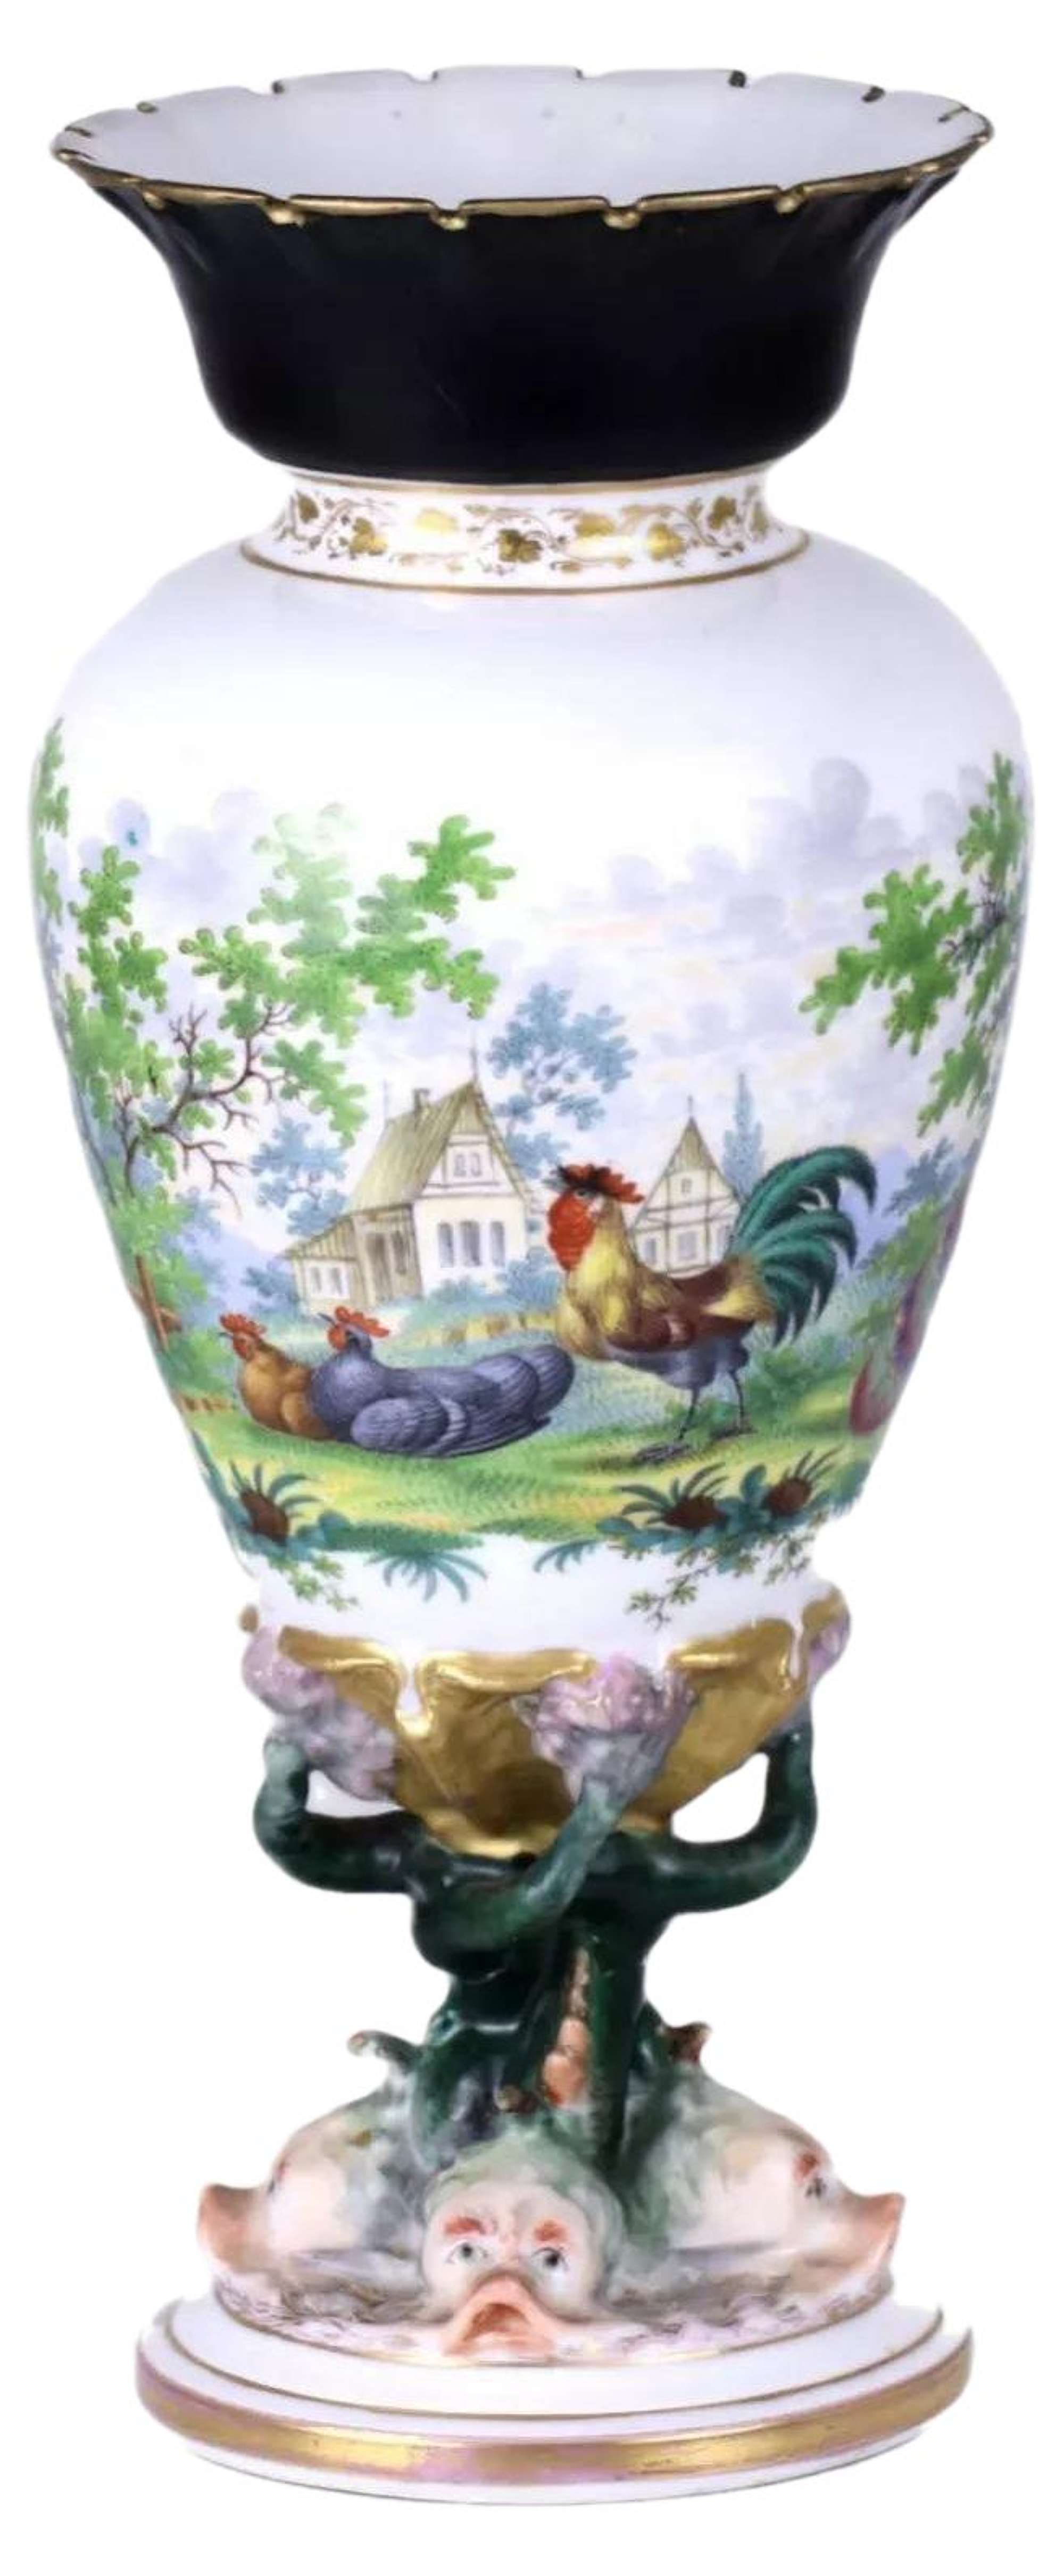 Vase from Hutschenreuther Hohenberg, Germany